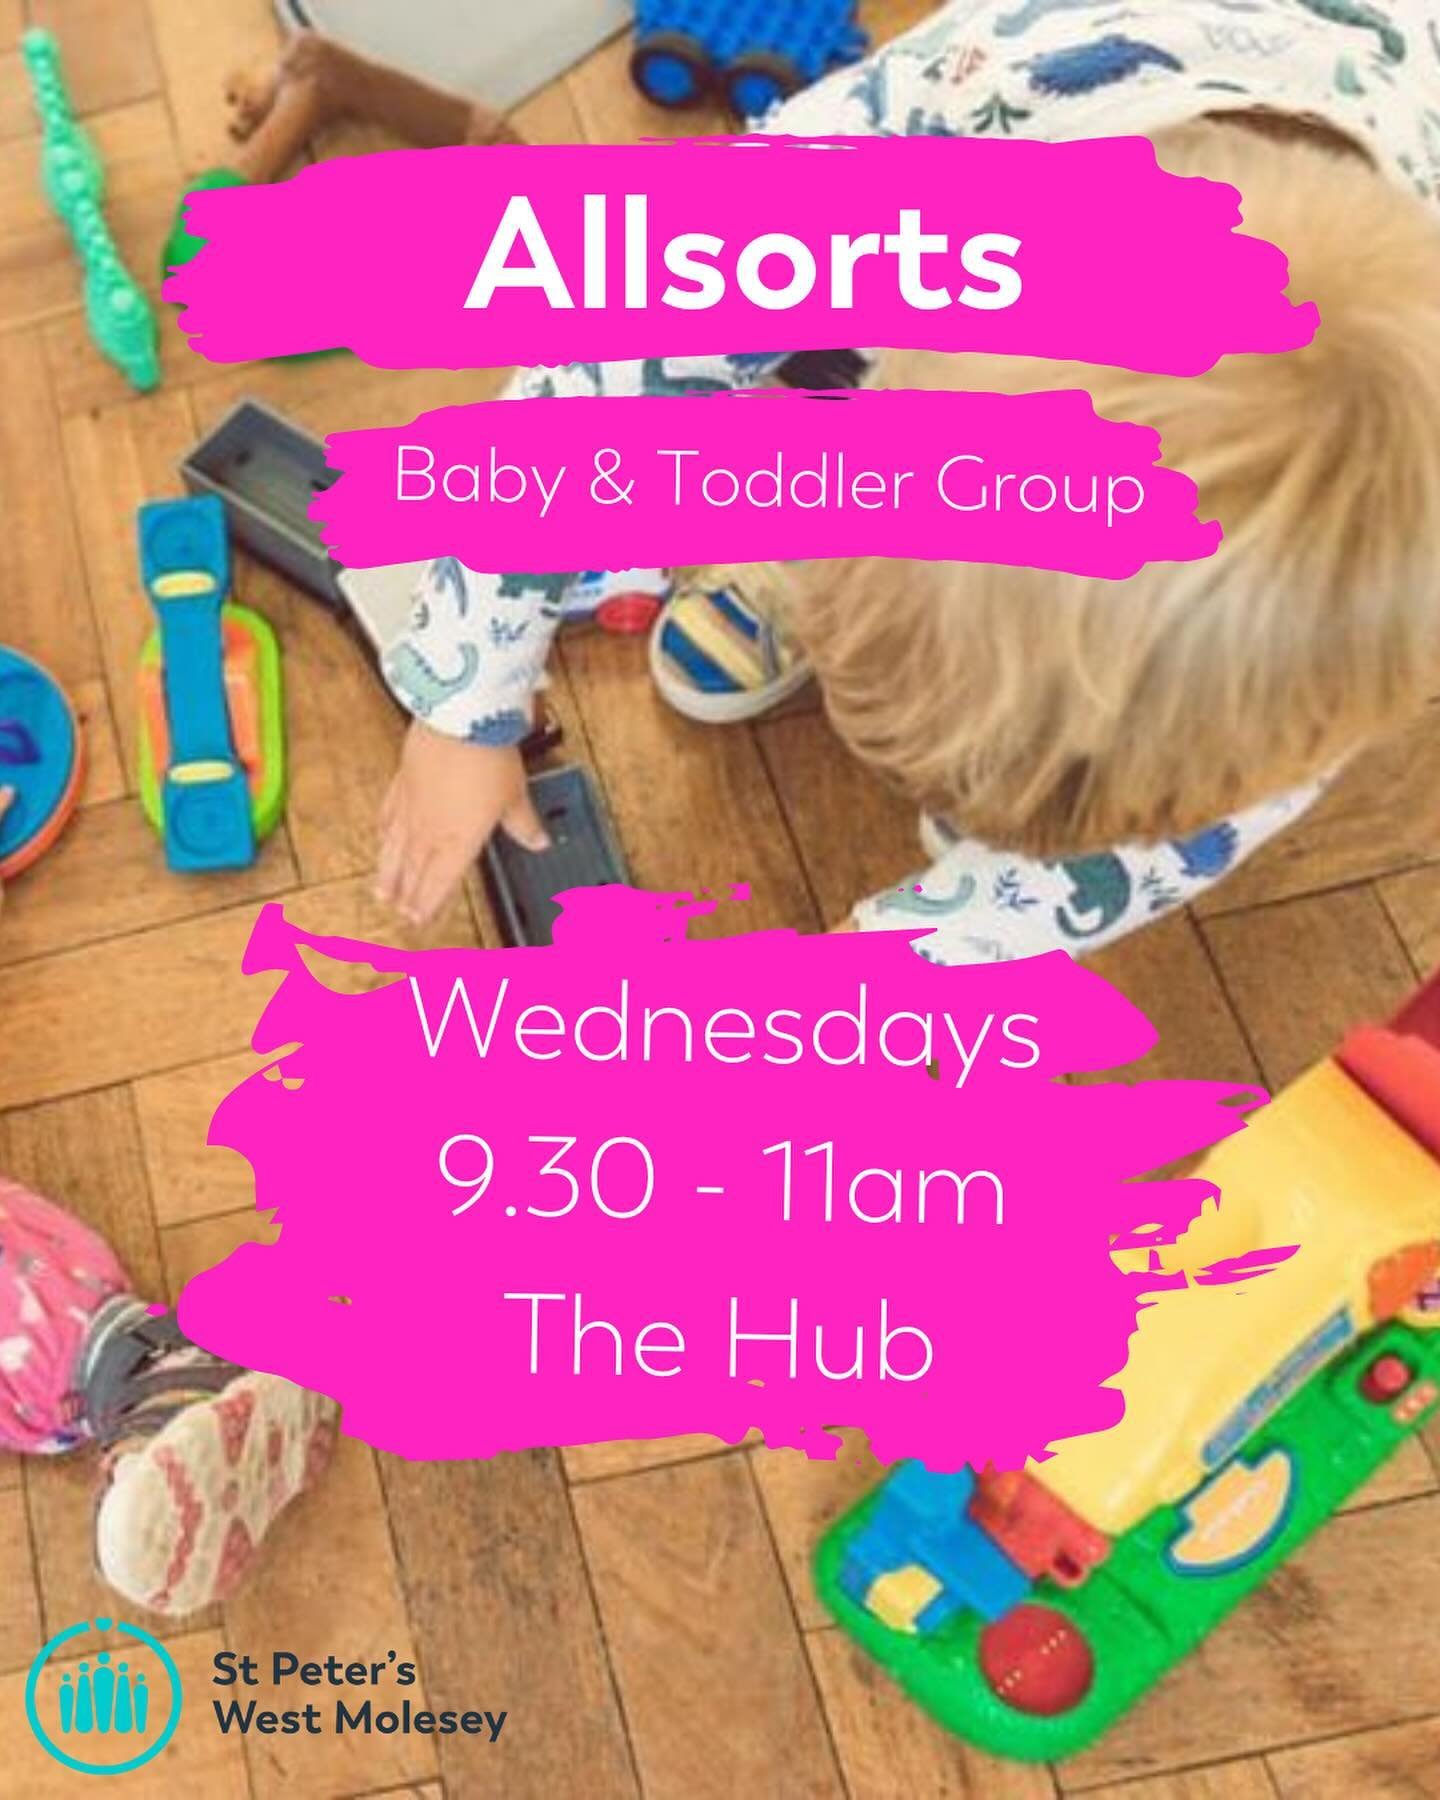 There&rsquo;s lots on today at St Peter&rsquo;s! On Wednesdays we have:

Allsorts Toddler Group: 9.30 - 11am at The Hub
Lighthouse Club for ages 7-11 years at The Hub
Ladies Night In: 8-9pm at 518 Walton Road